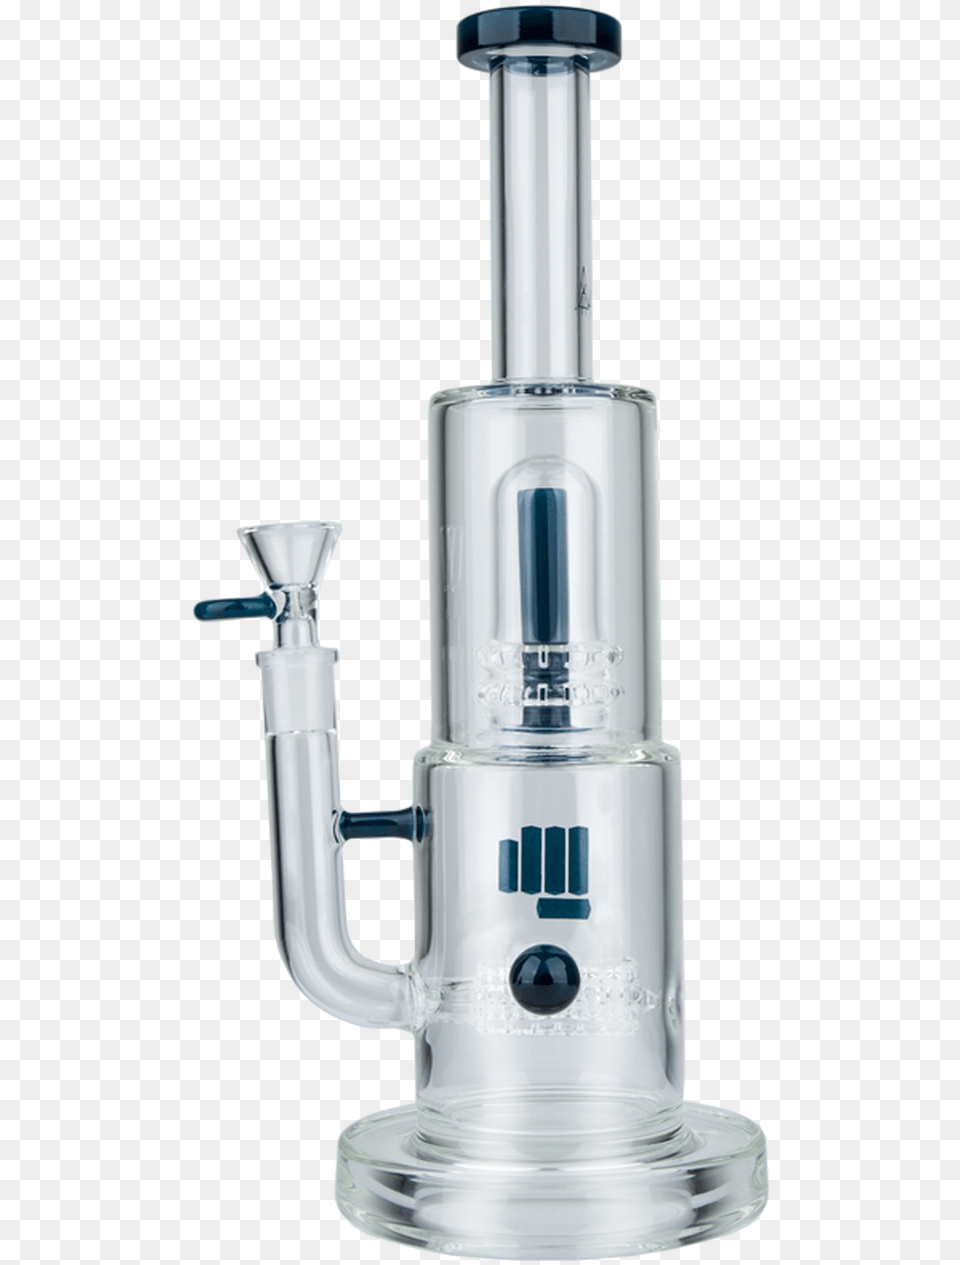 Snoop Dogg Pounds 135 Mothership Water Pipe Cylinder, Smoke Pipe, Device, Appliance, Electrical Device Png Image